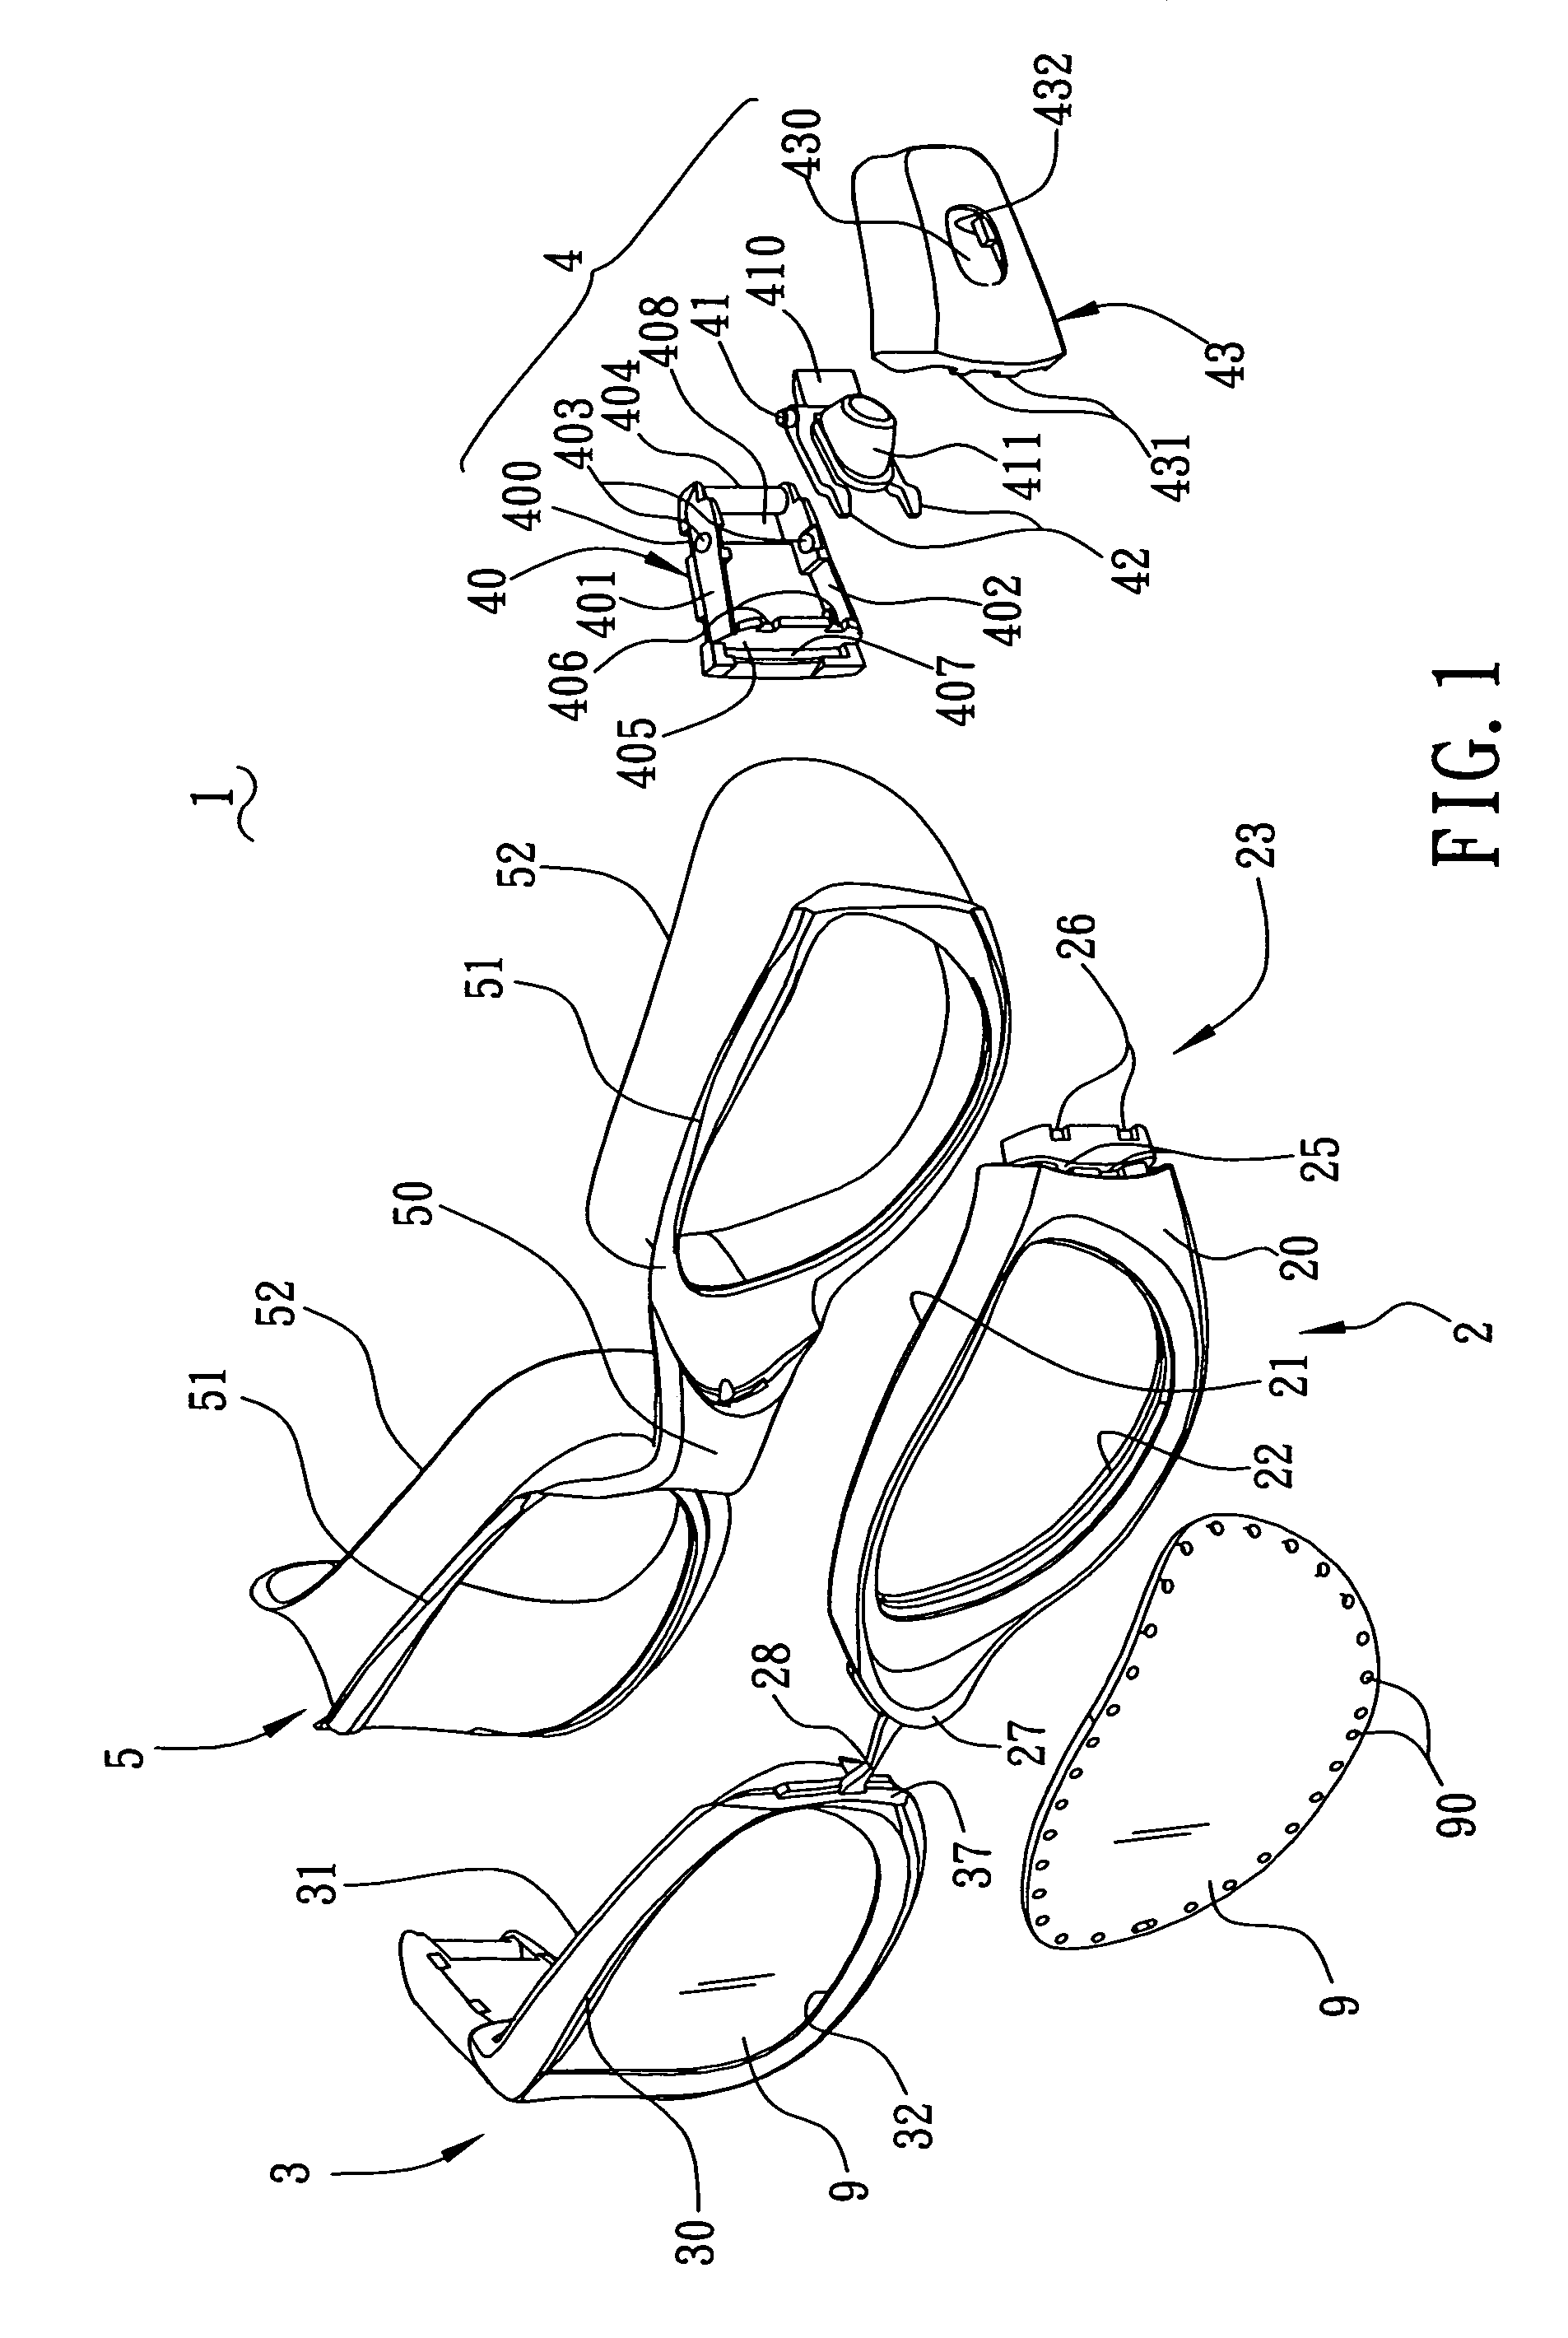 Swimming goggles with strap adjusting device